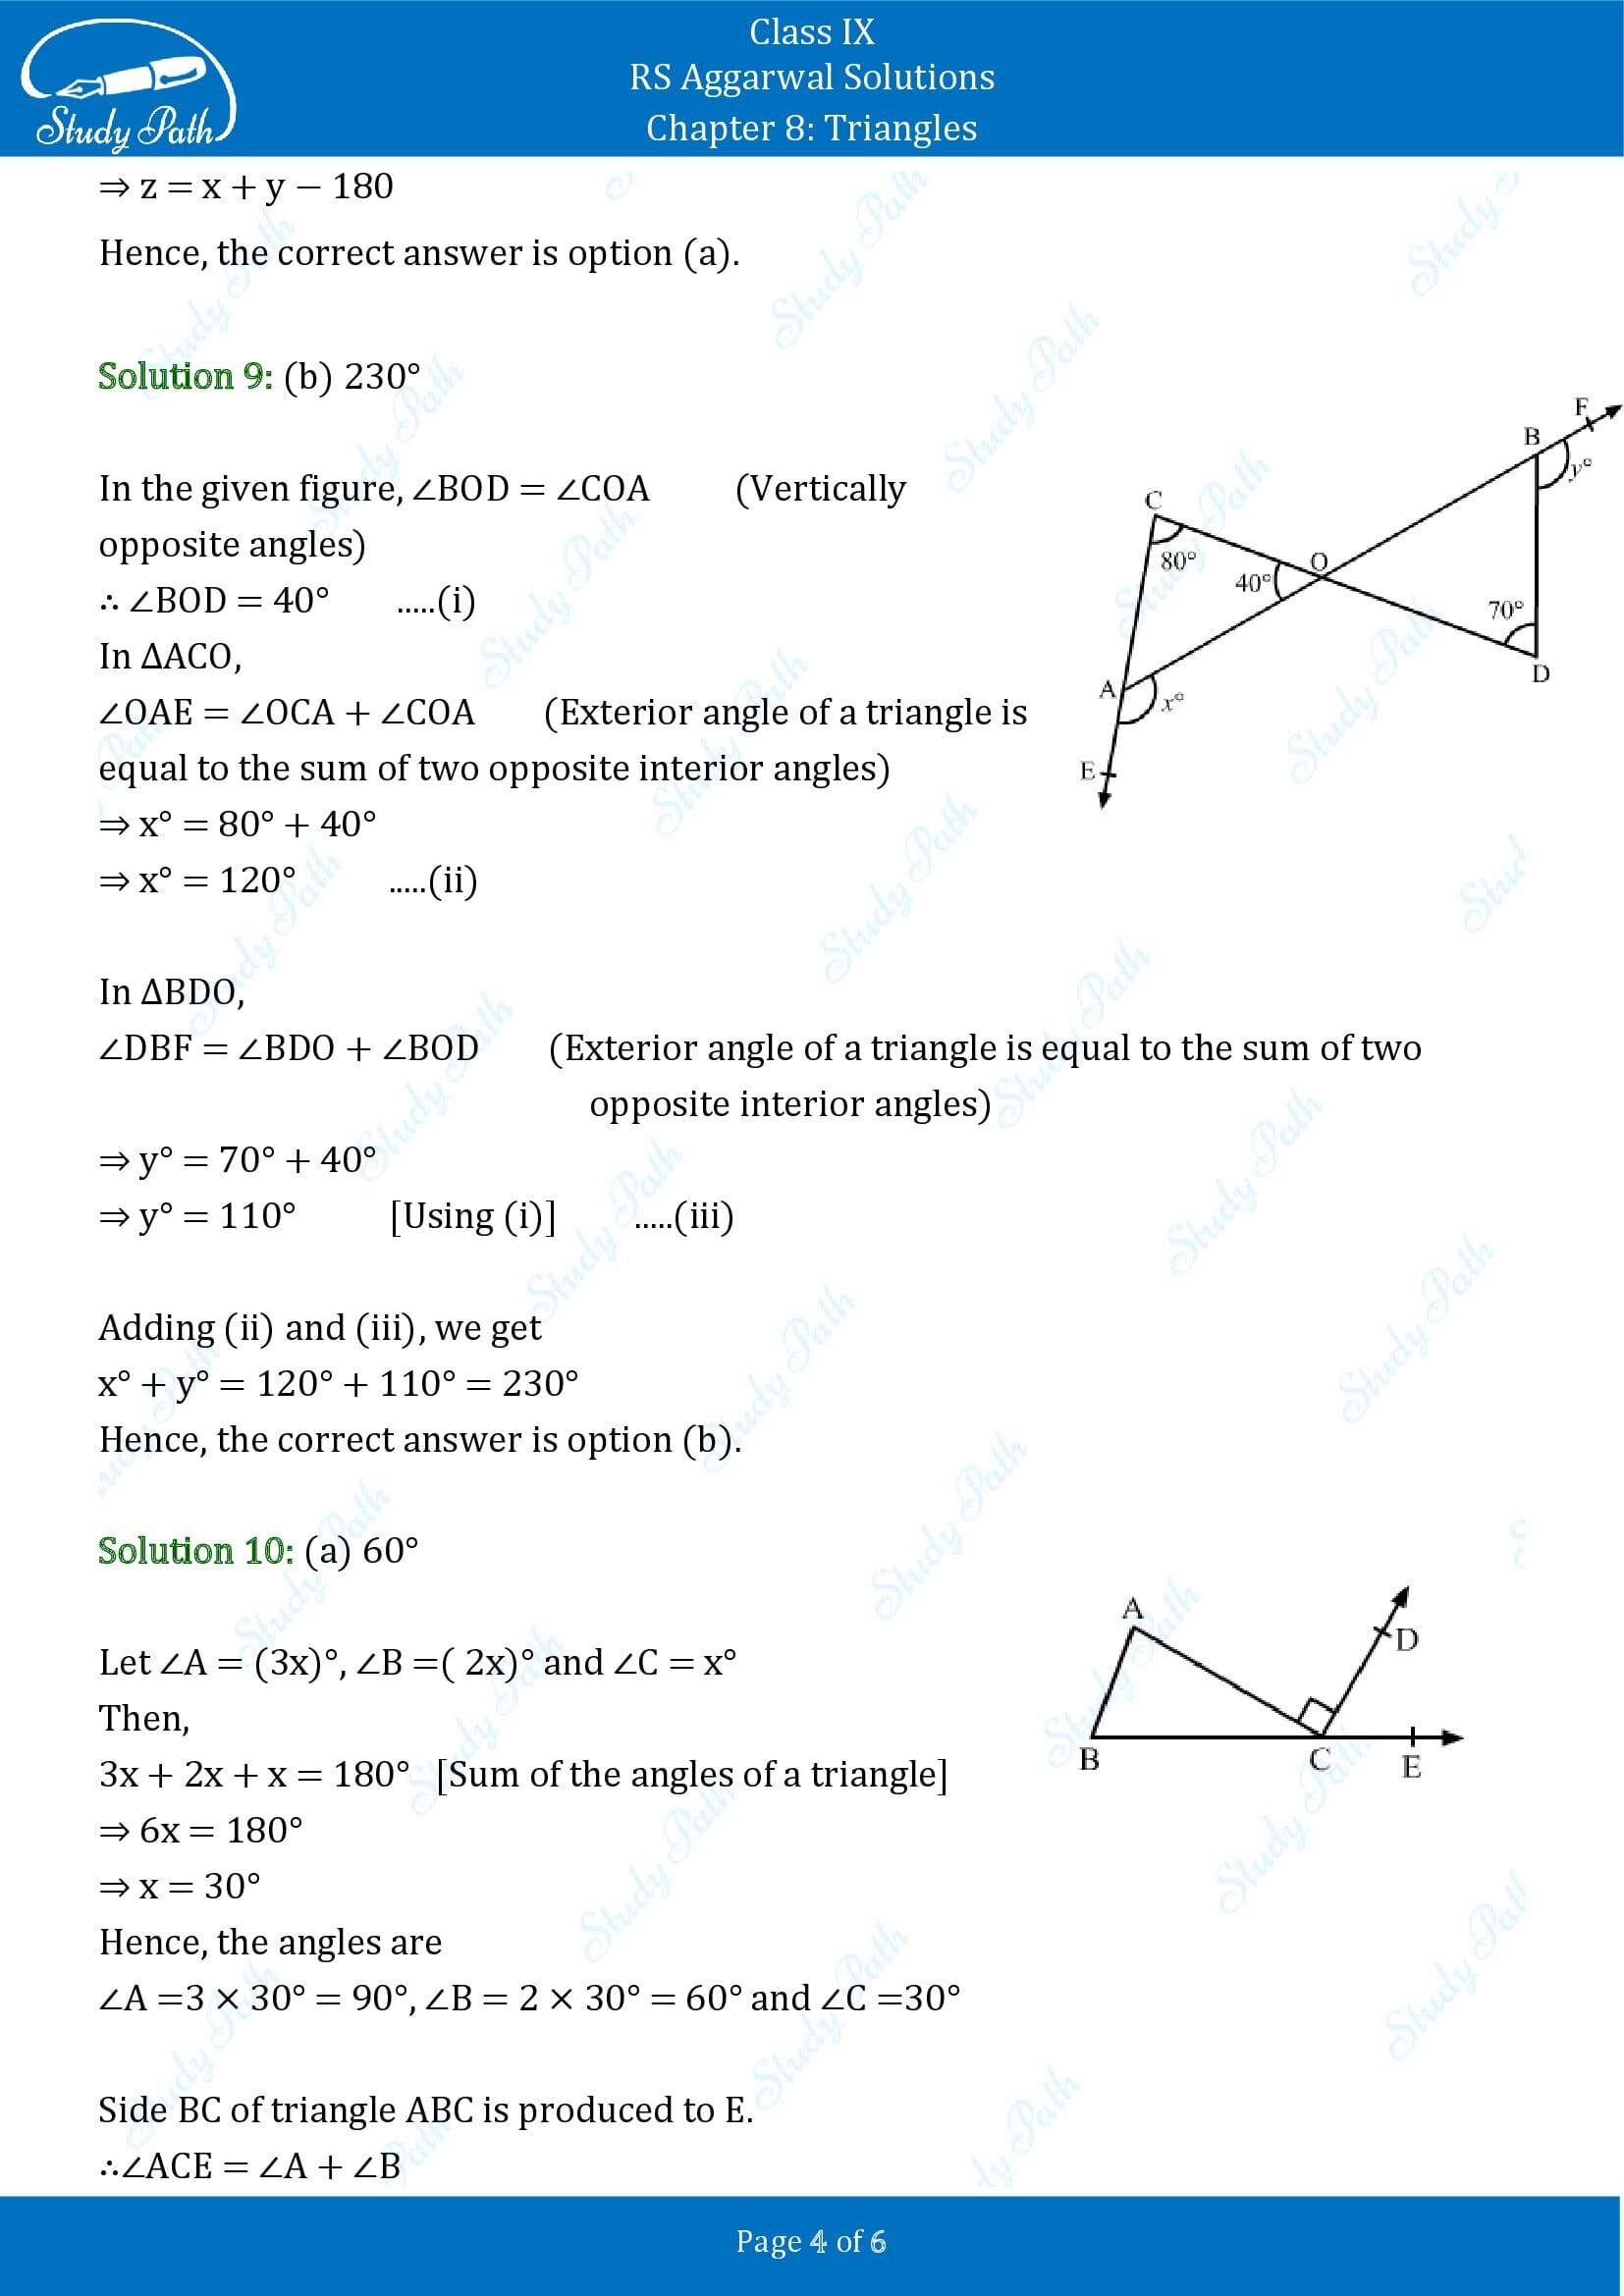 RS Aggarwal Solutions Class 9 Chapter 8 Triangles Multiple Choice Questions MCQs 0004